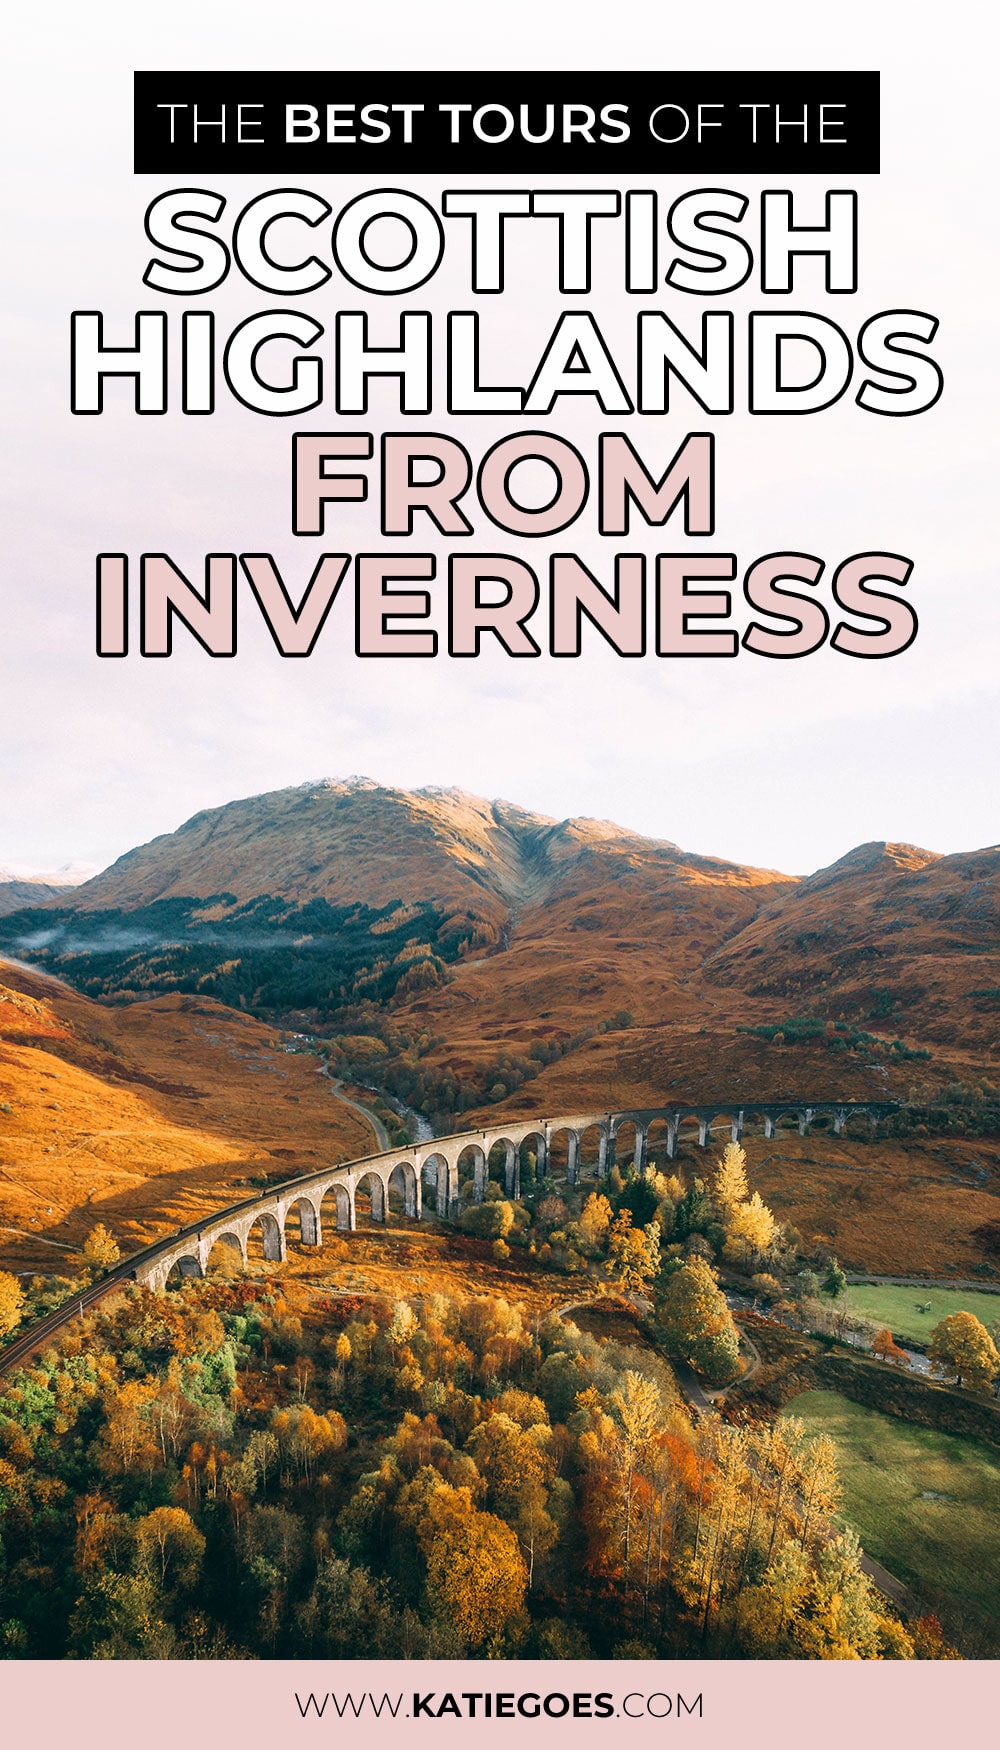 The Best Tours from Inverness of the Scottish Highlands